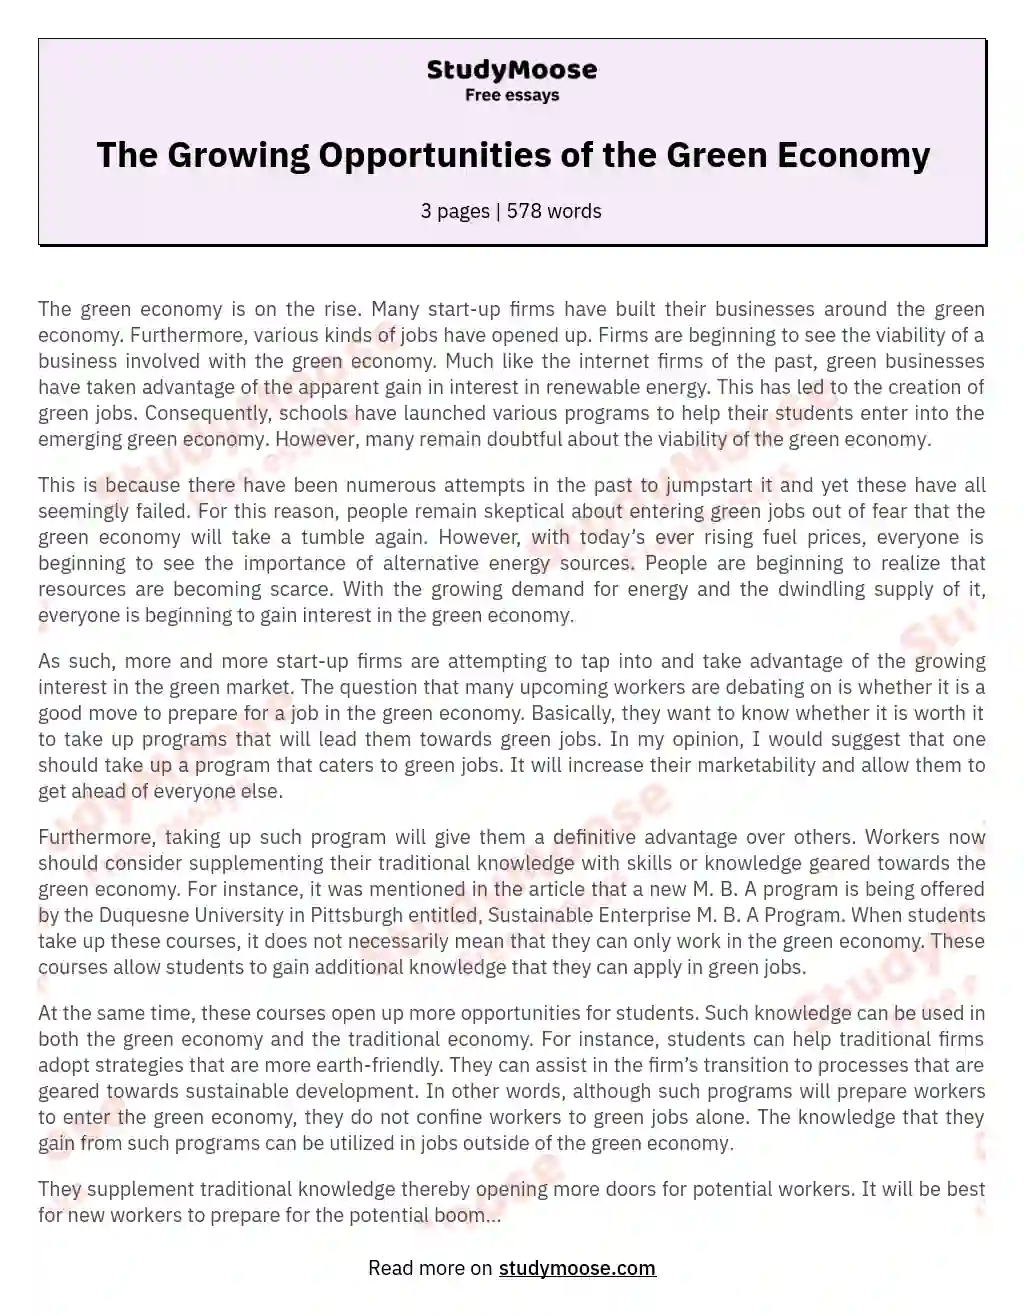 The Growing Opportunities of the Green Economy essay